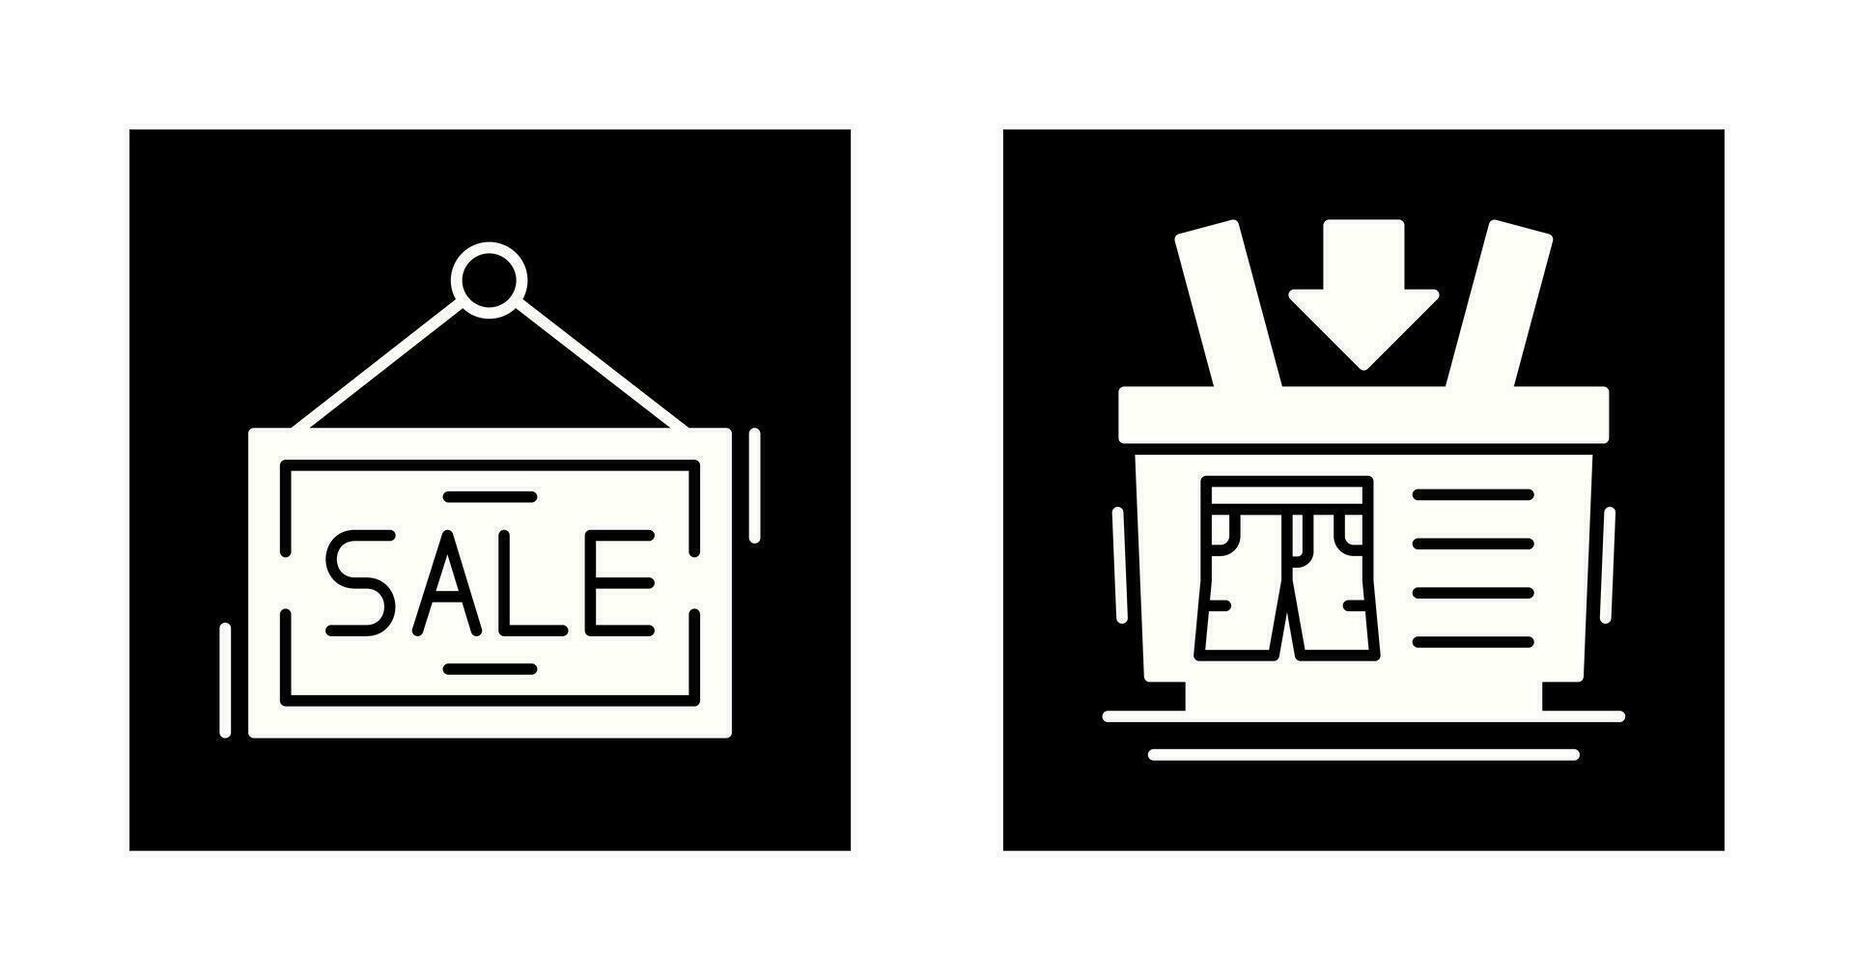 Shopping Basket and Super Sale Icon vector